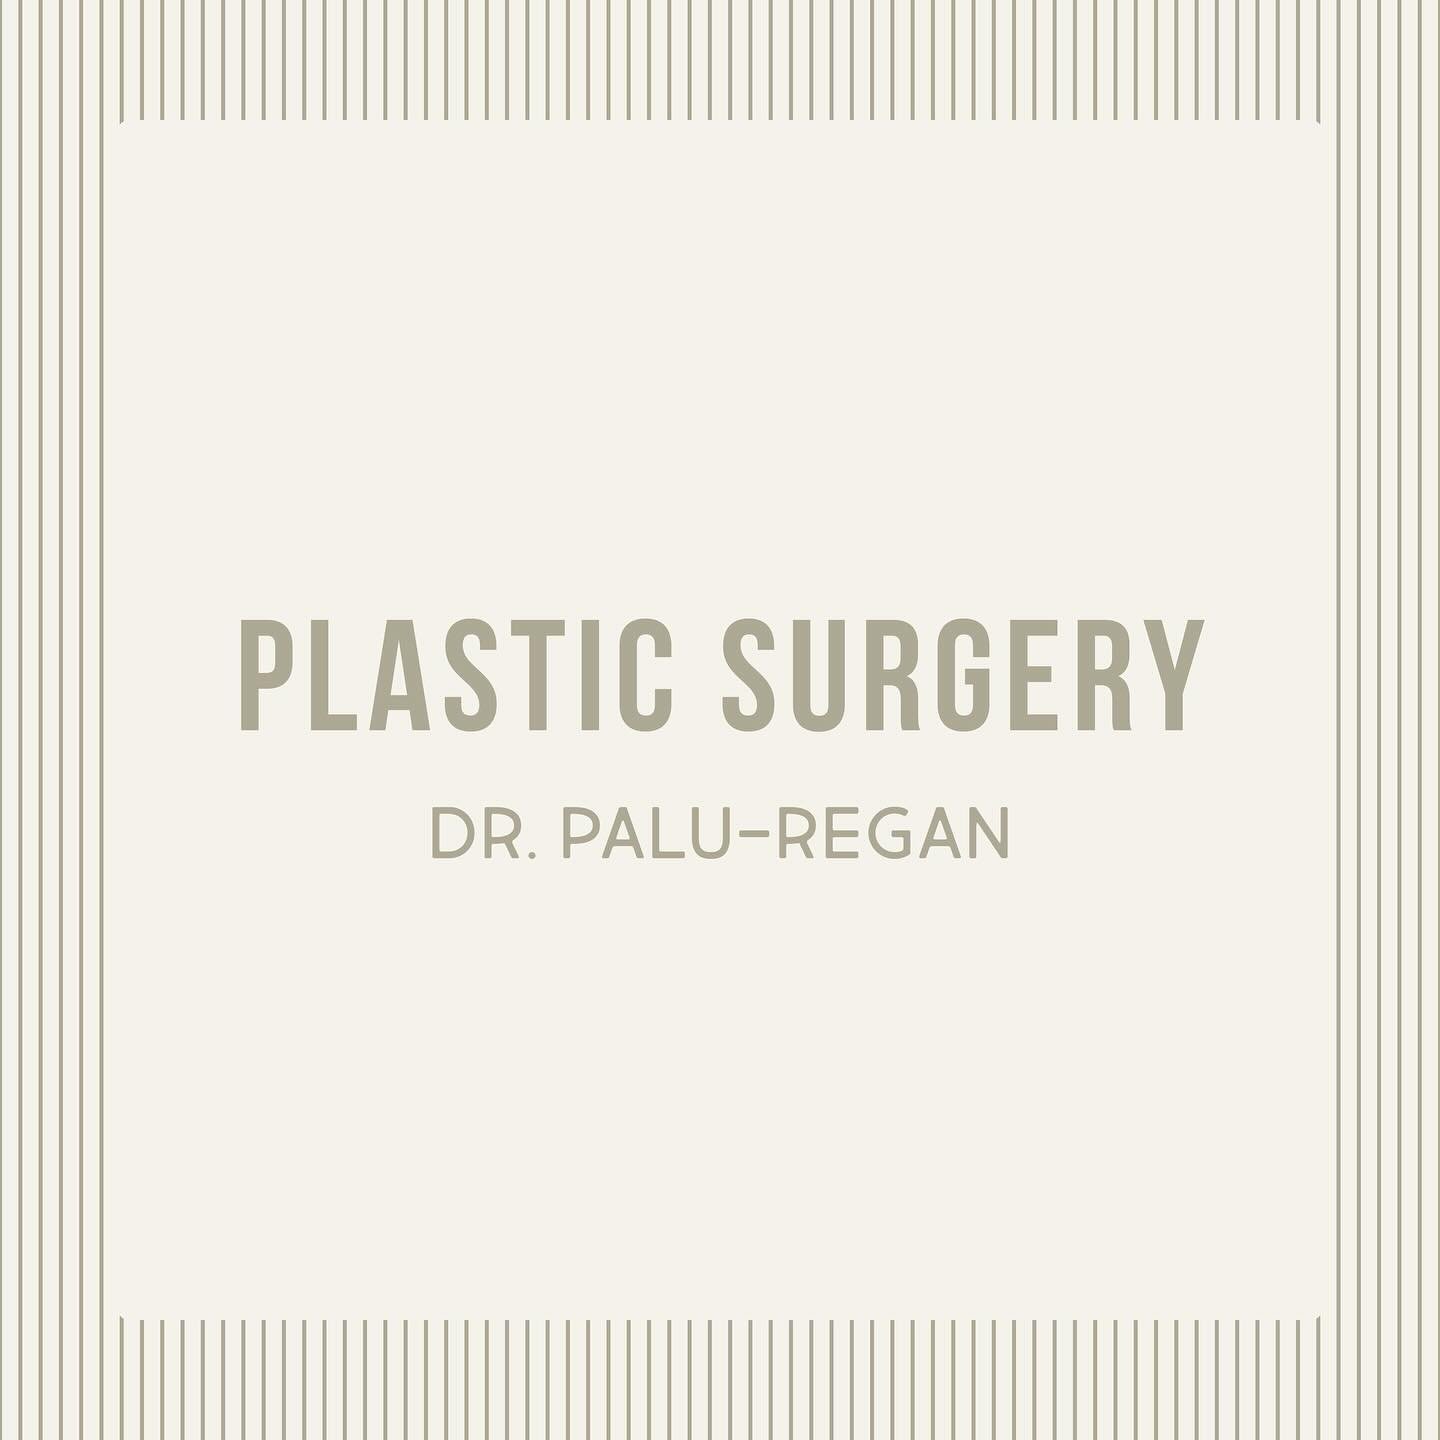 ⭐️Say hello to Dr. John-Paul Regan⭐️ 
Our brilliant plastic reconstructive surgeon at Jolie! Throughout May, he&rsquo;s giving you a reason to smile by waving the $100 consultation fee as part of our special spring promo!

Book your teleconsultation 